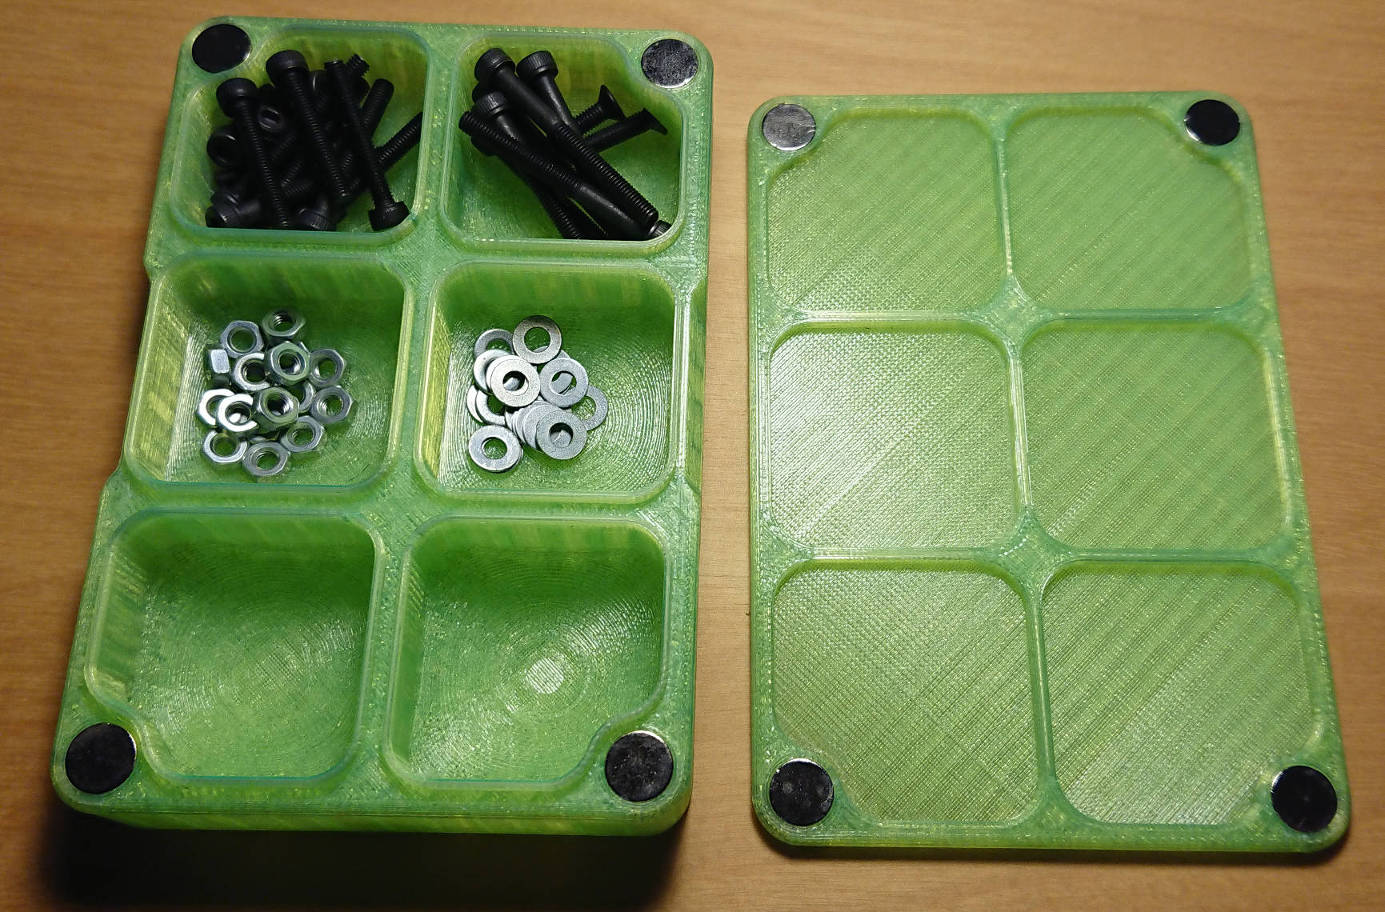 PETG screw box, opened with lid and base visible